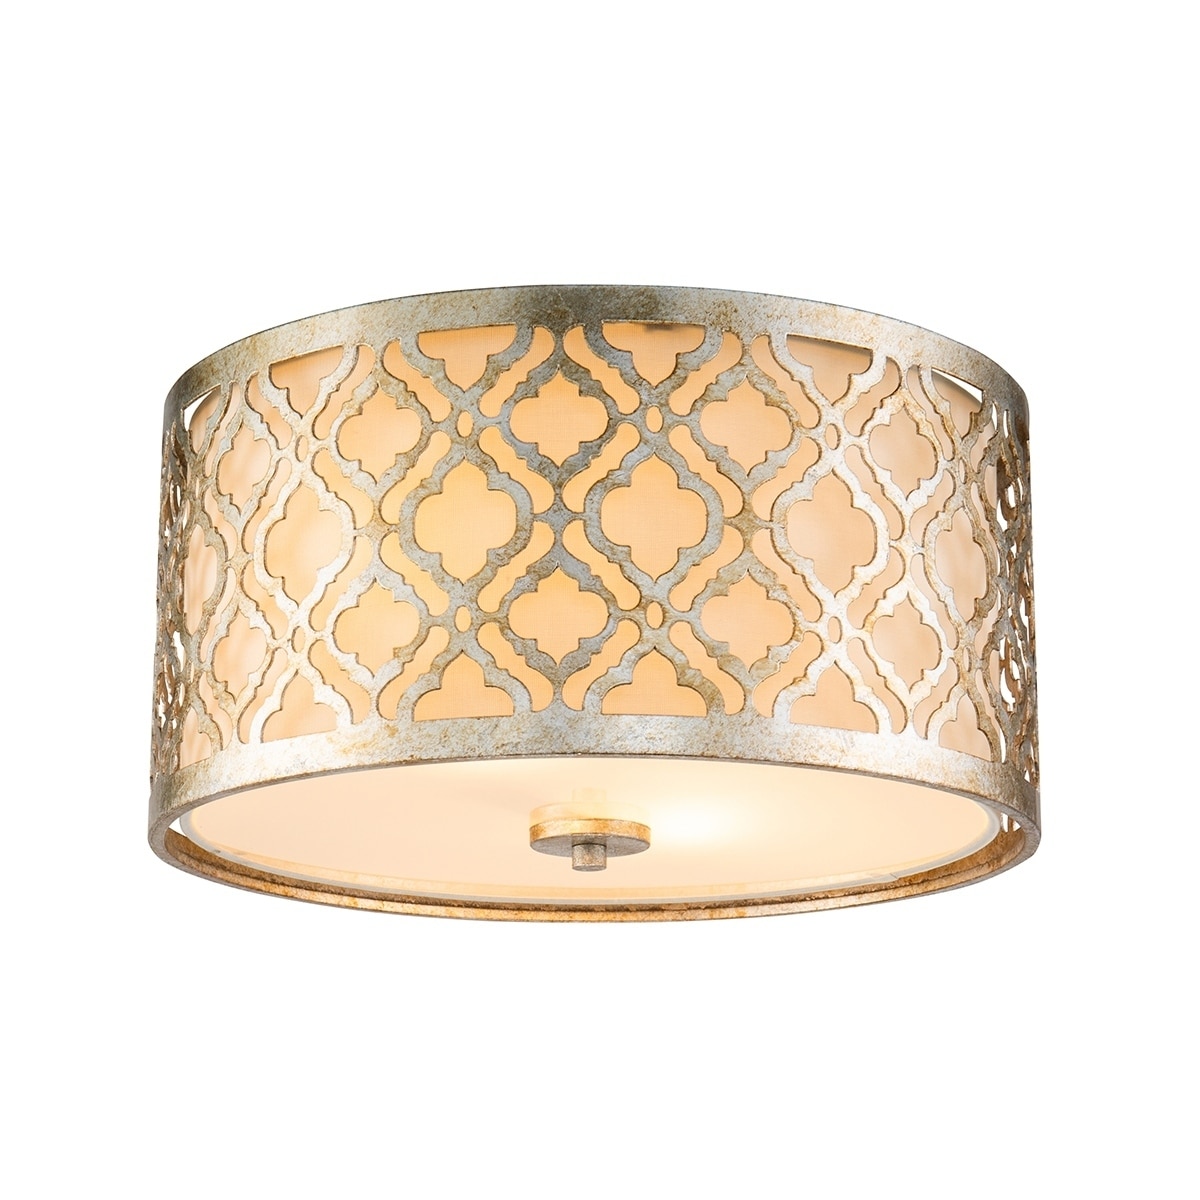 Modern Wall Sconce Light-Aged Brass with Wrap Around Shade/Crystal Accents-FS 